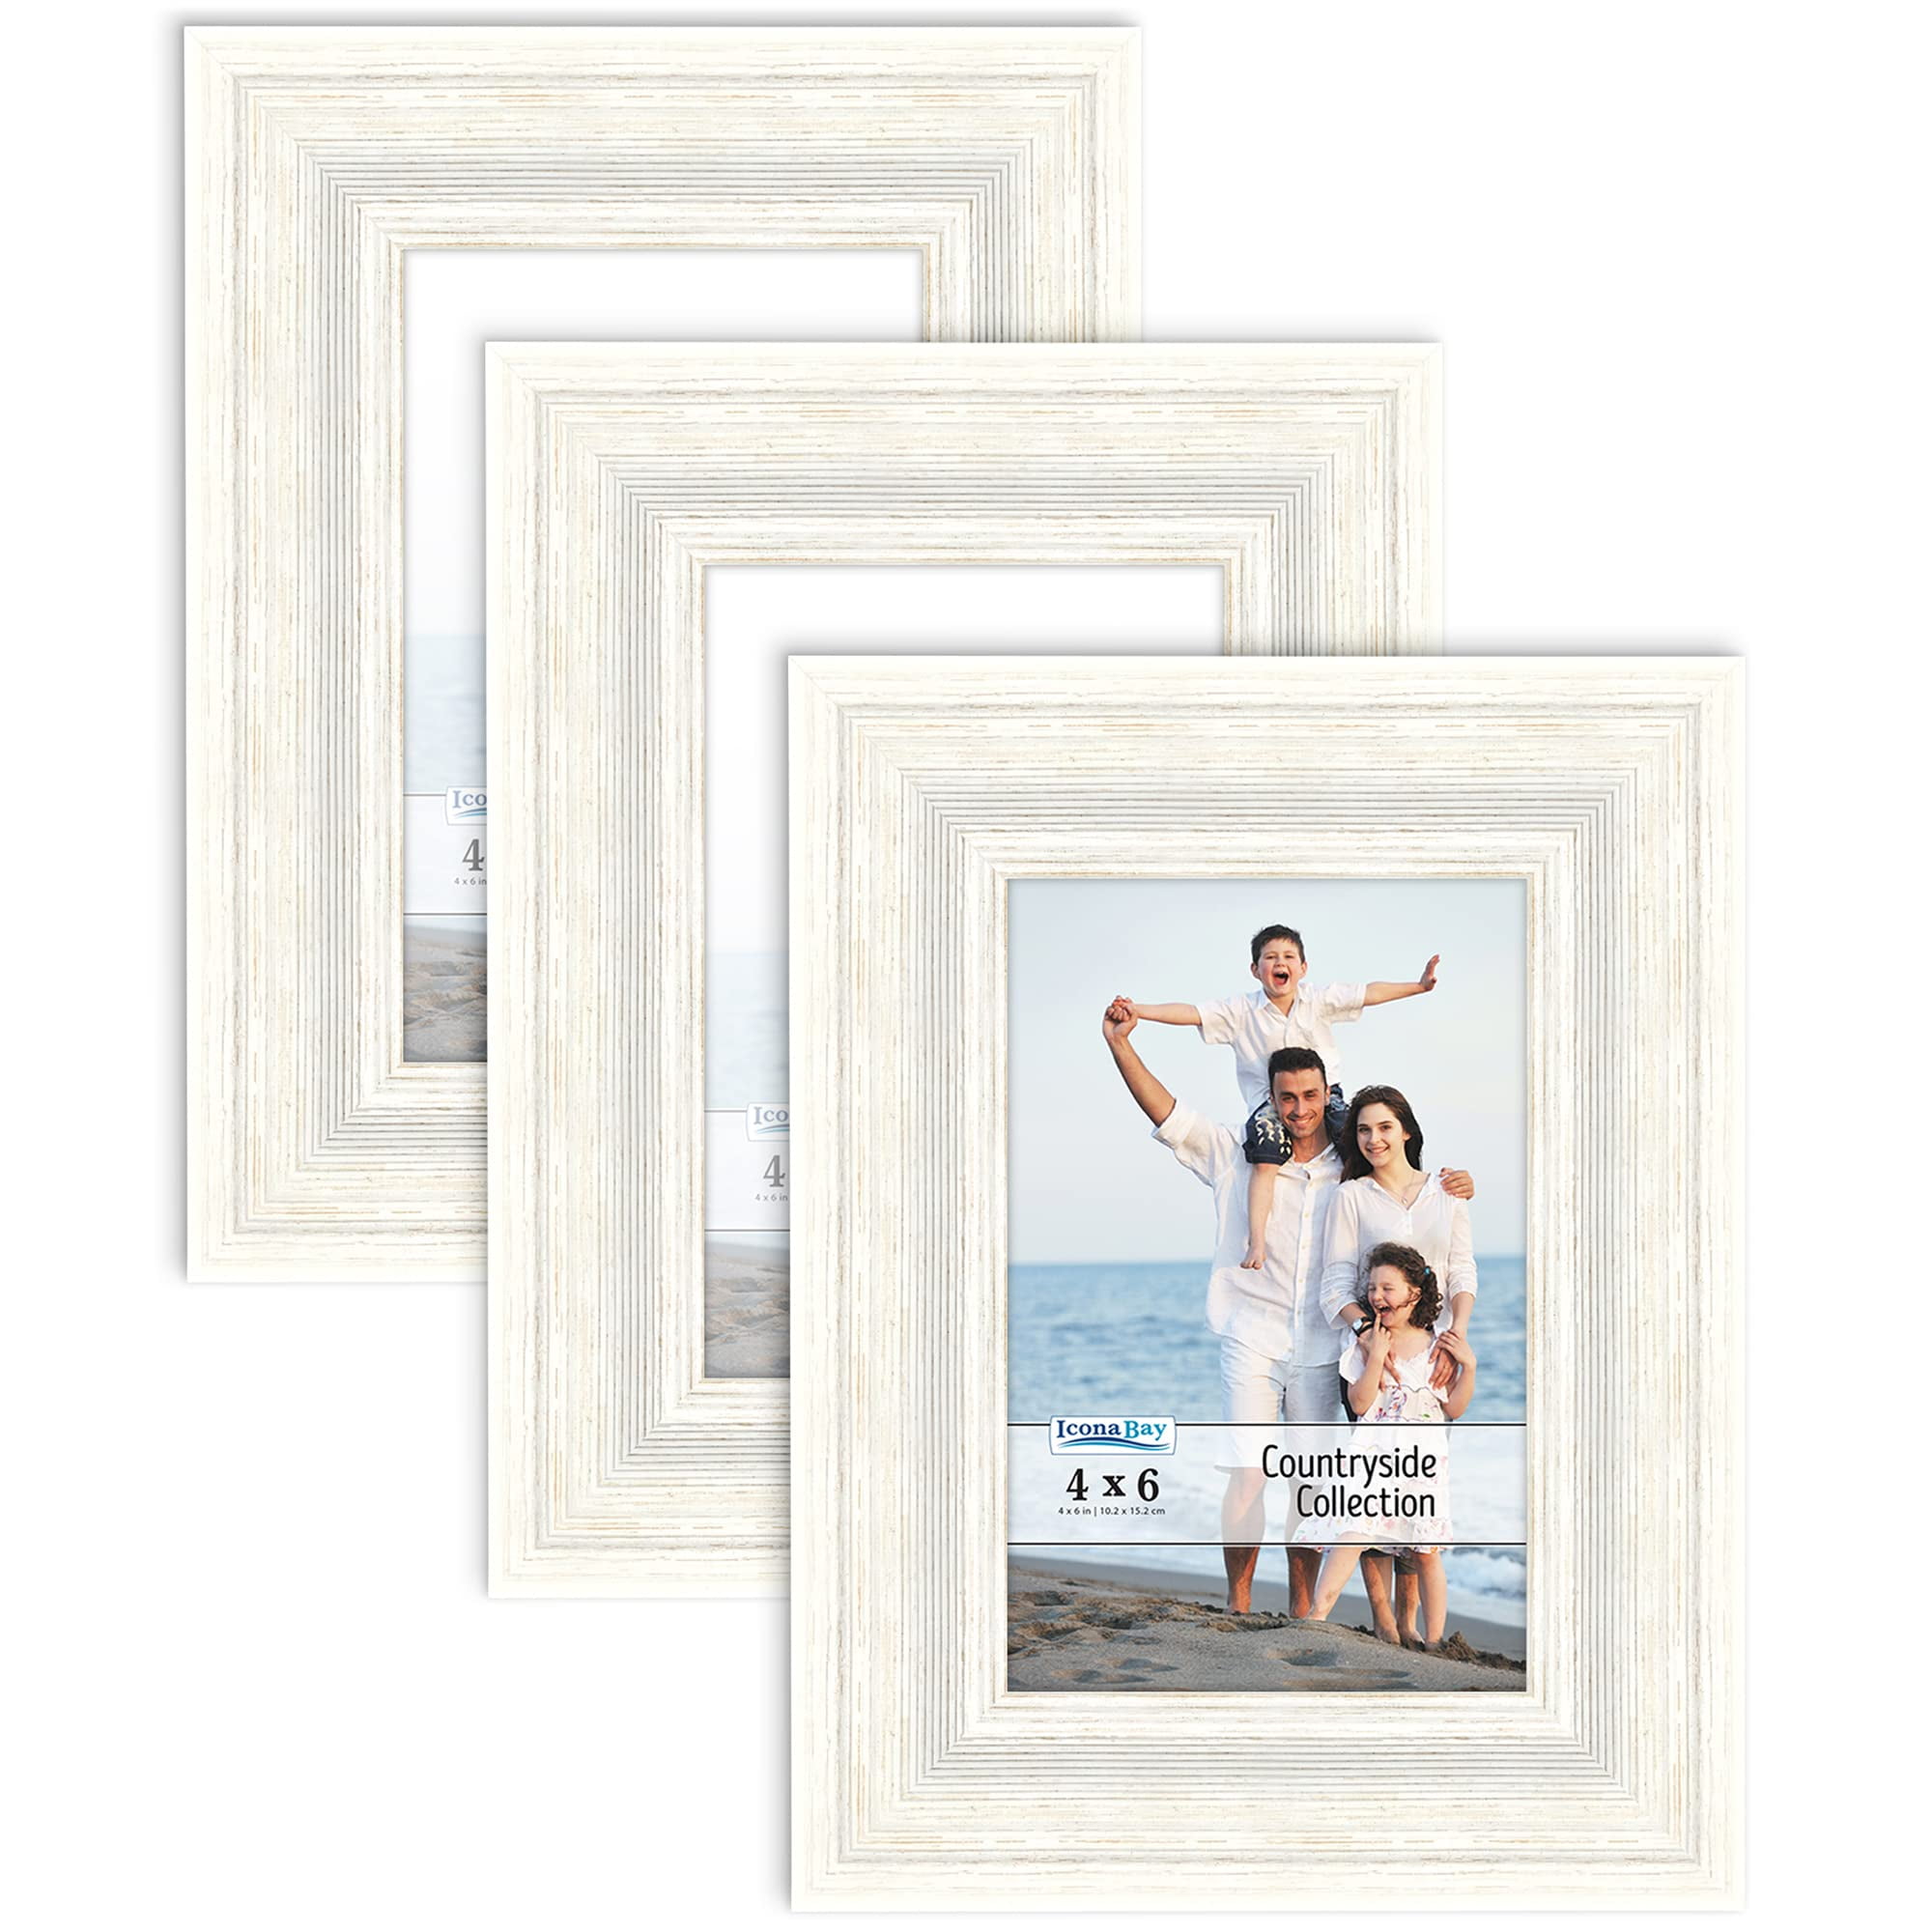 Dual Purpose 8x10 and 5x7 White Wood Picture Frame Details about   BRAND NEW